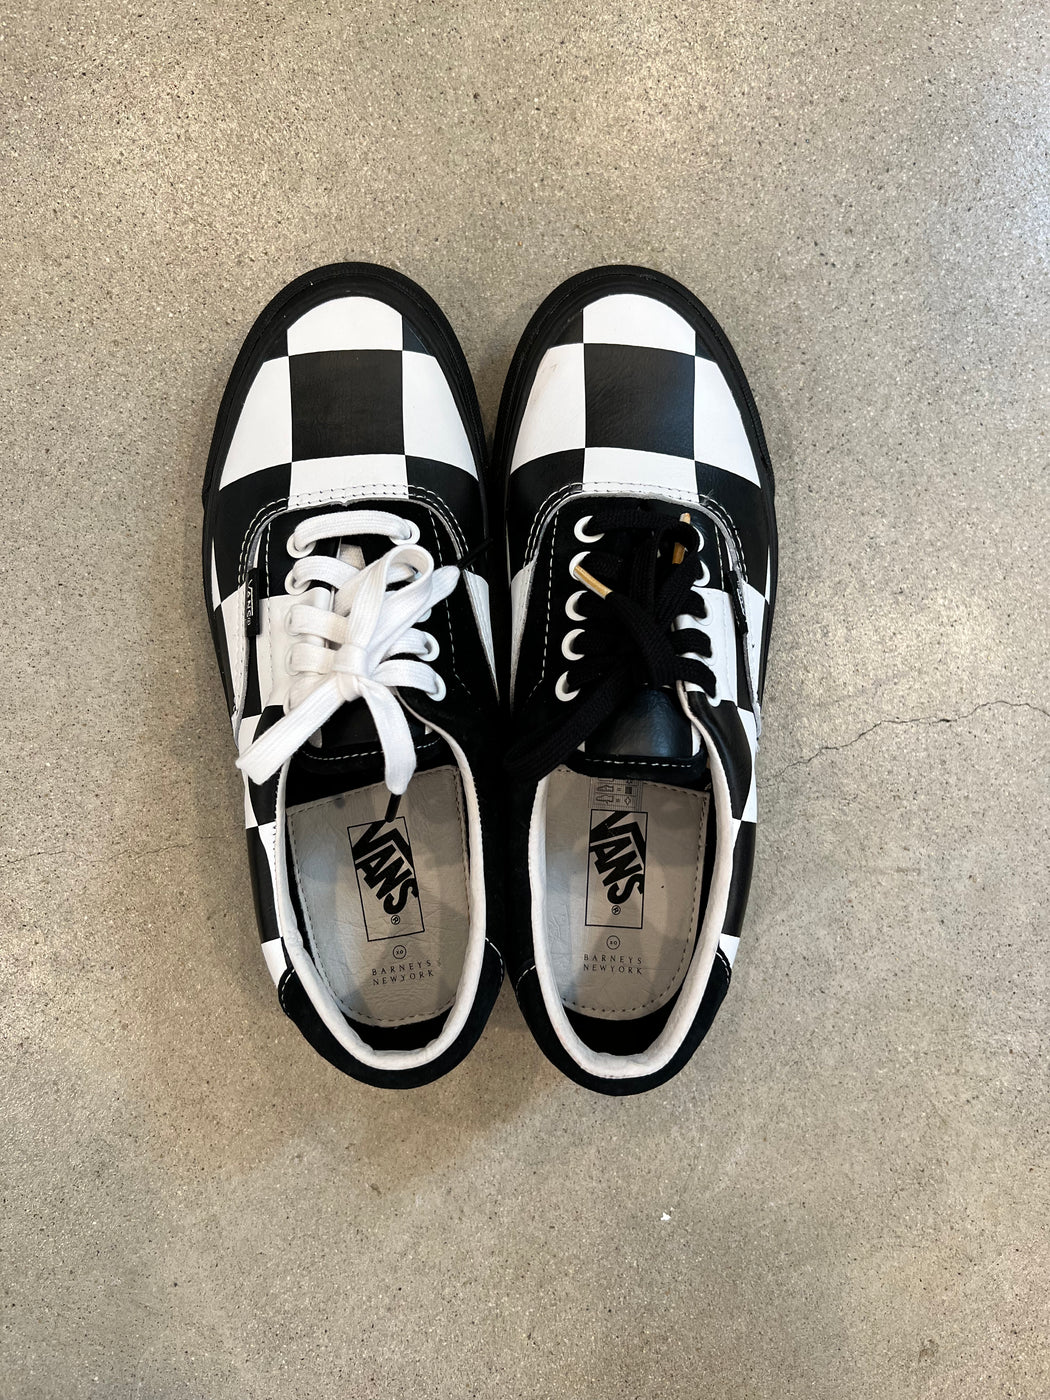 New -Rare Barney’s B&W Check Vans Size 7 Mens, Womens 8.5. PUNKWASP By Carrie Marill